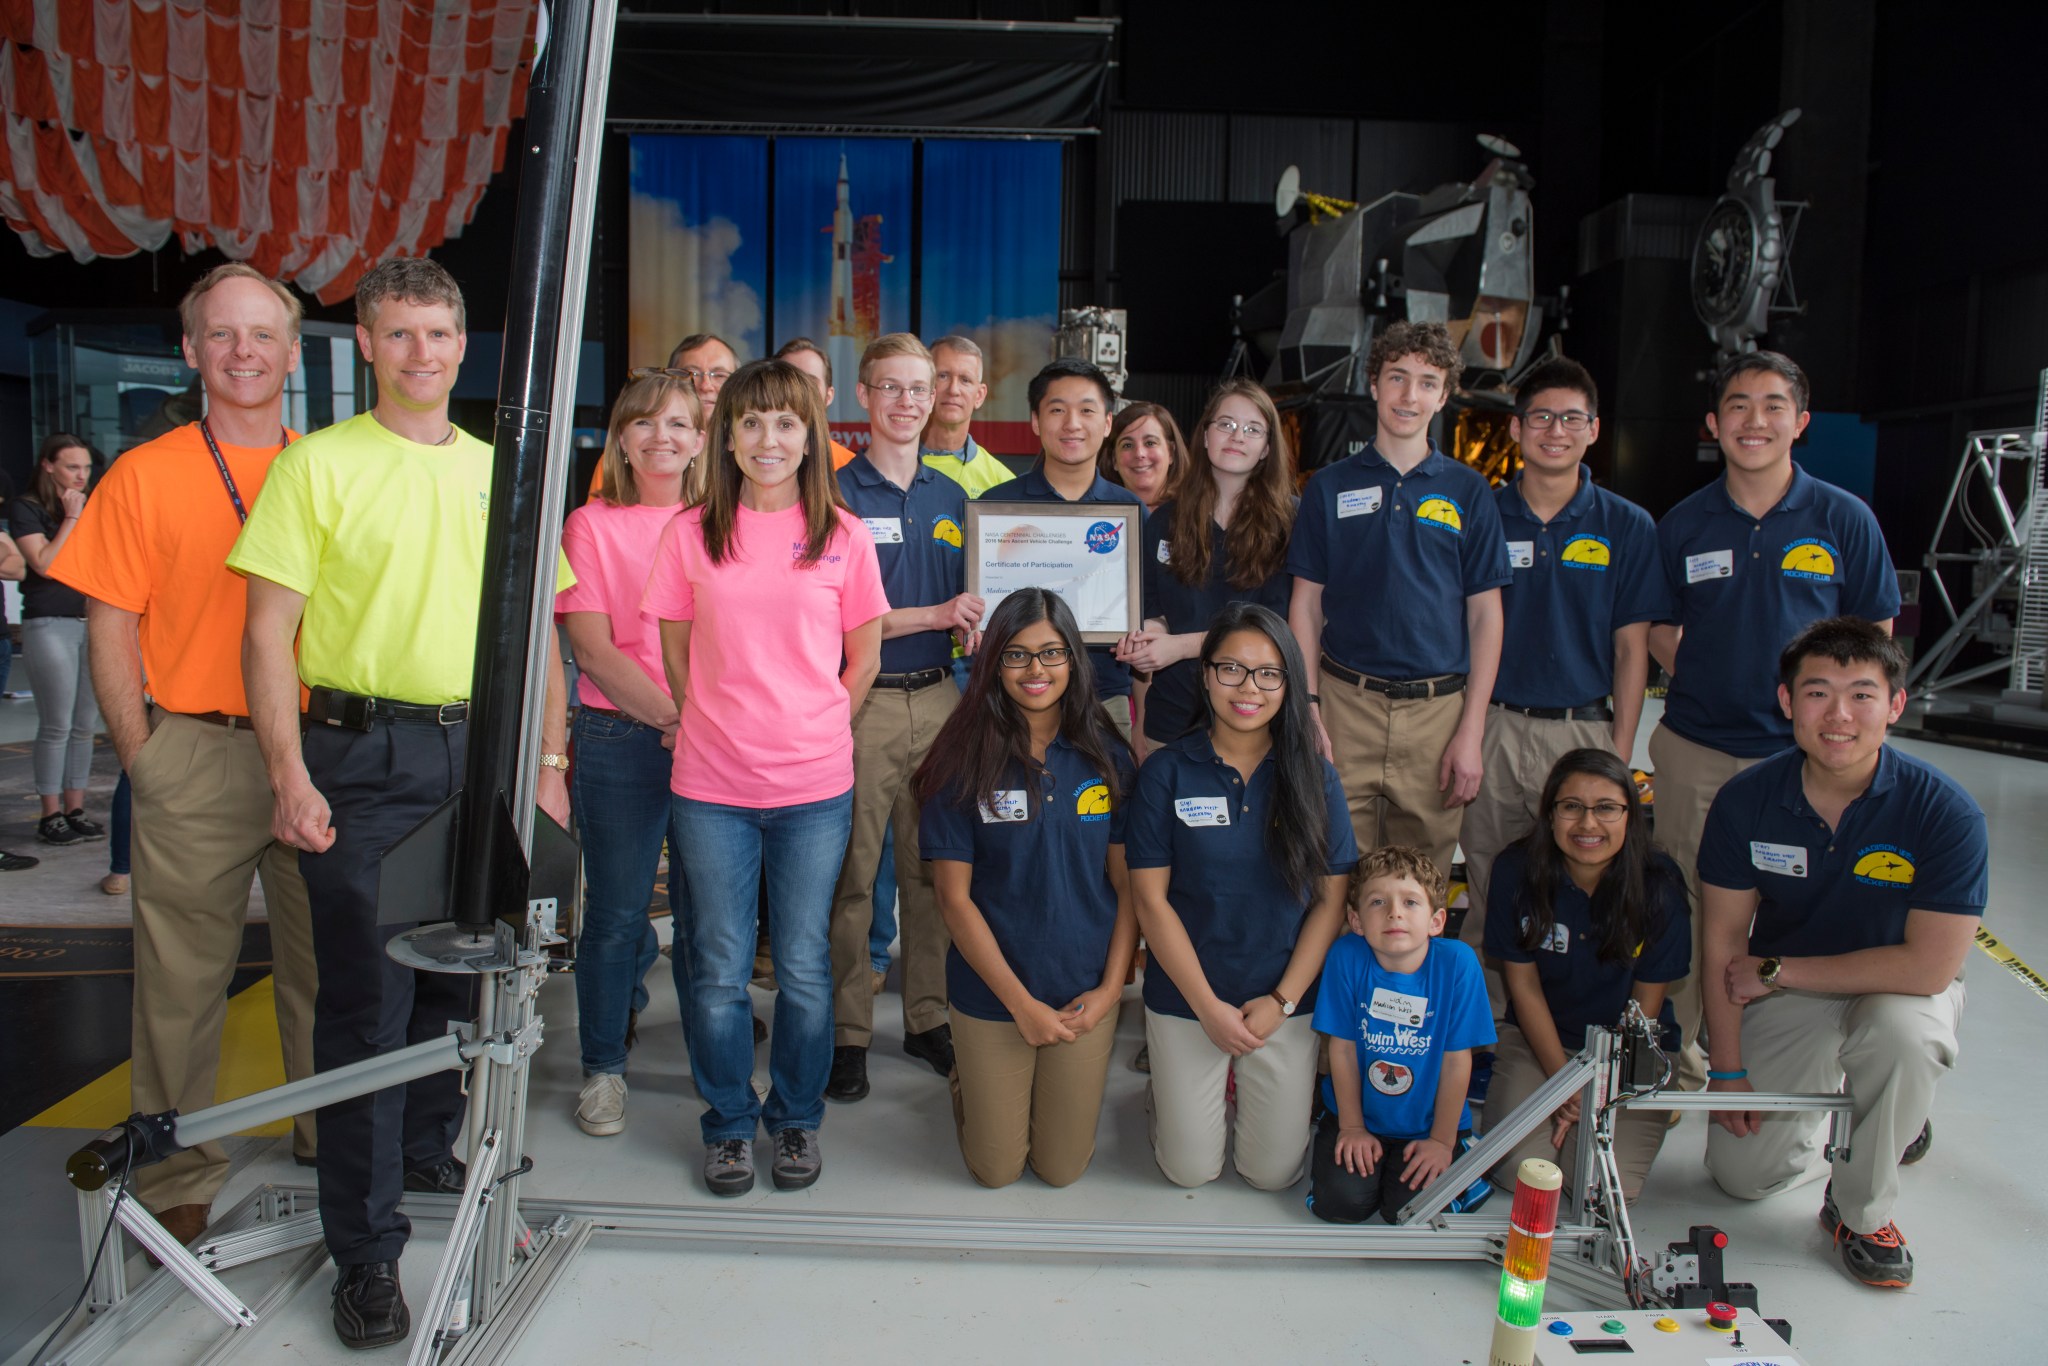 Madison West High School of Wisconsin earned second-place at the 2016 Centennial Challenges Mars Ascent Vehicle Prize.